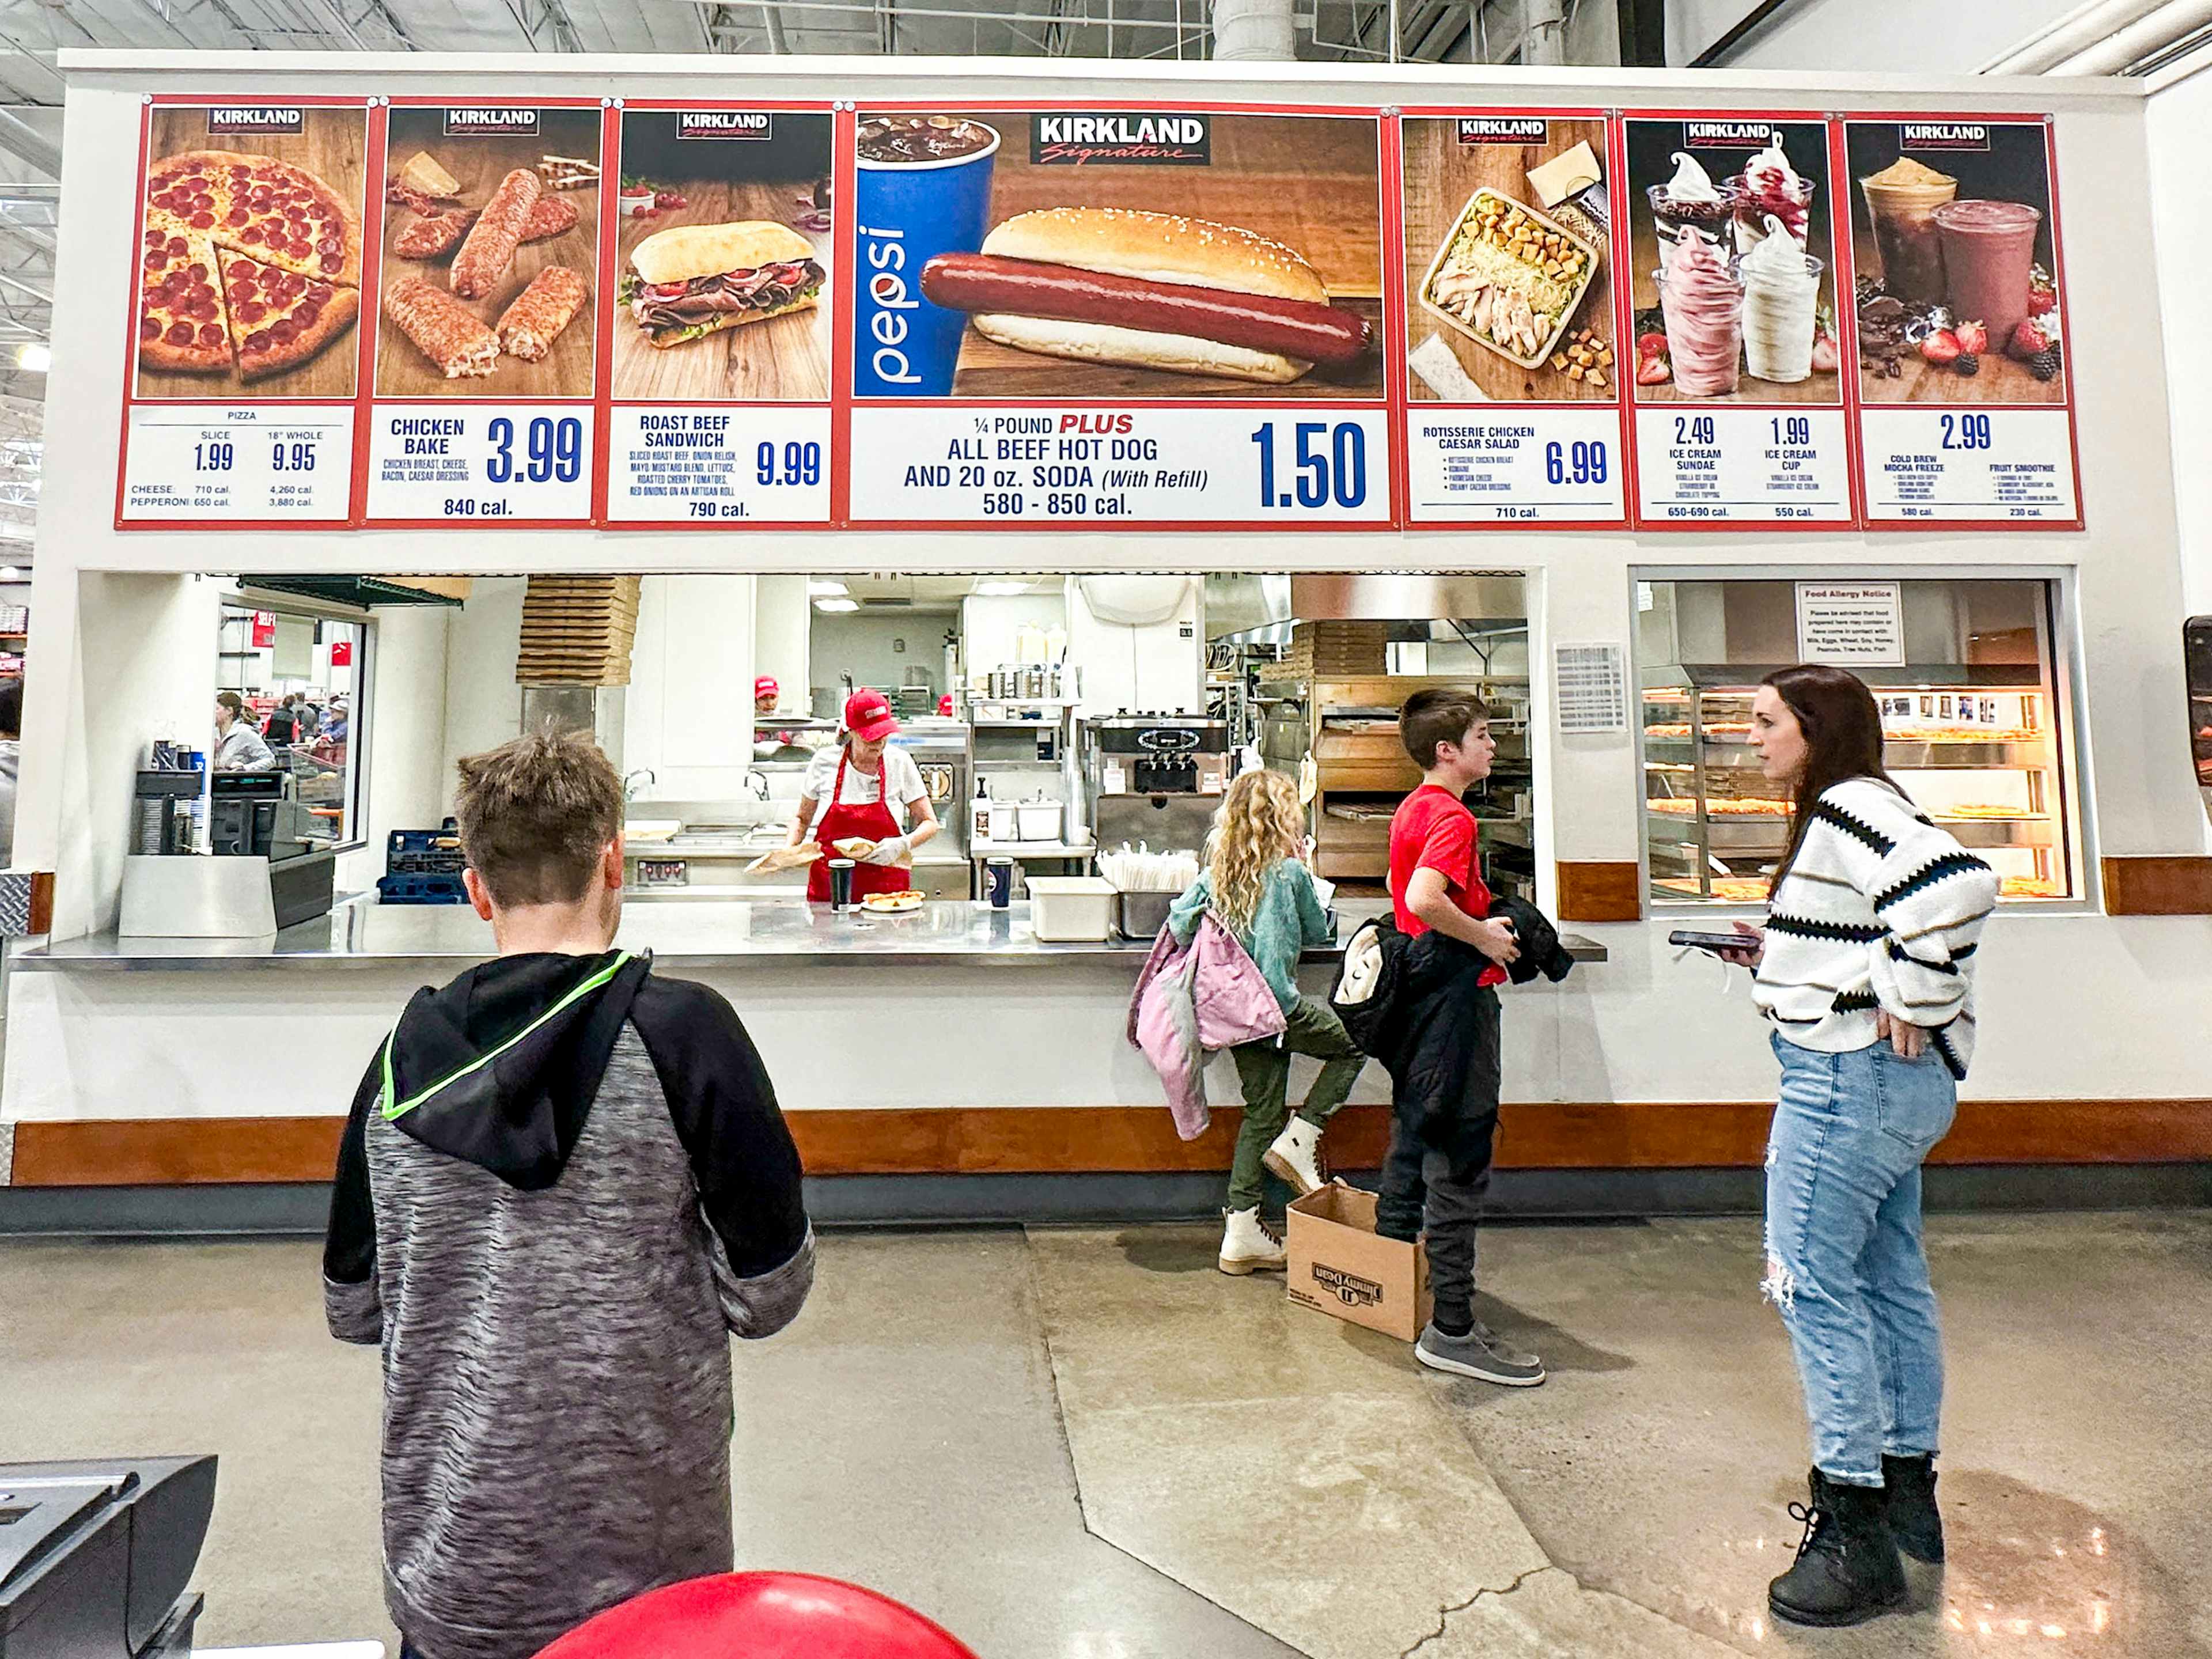 costco-wholesale-food-court-cafe-kcl-25